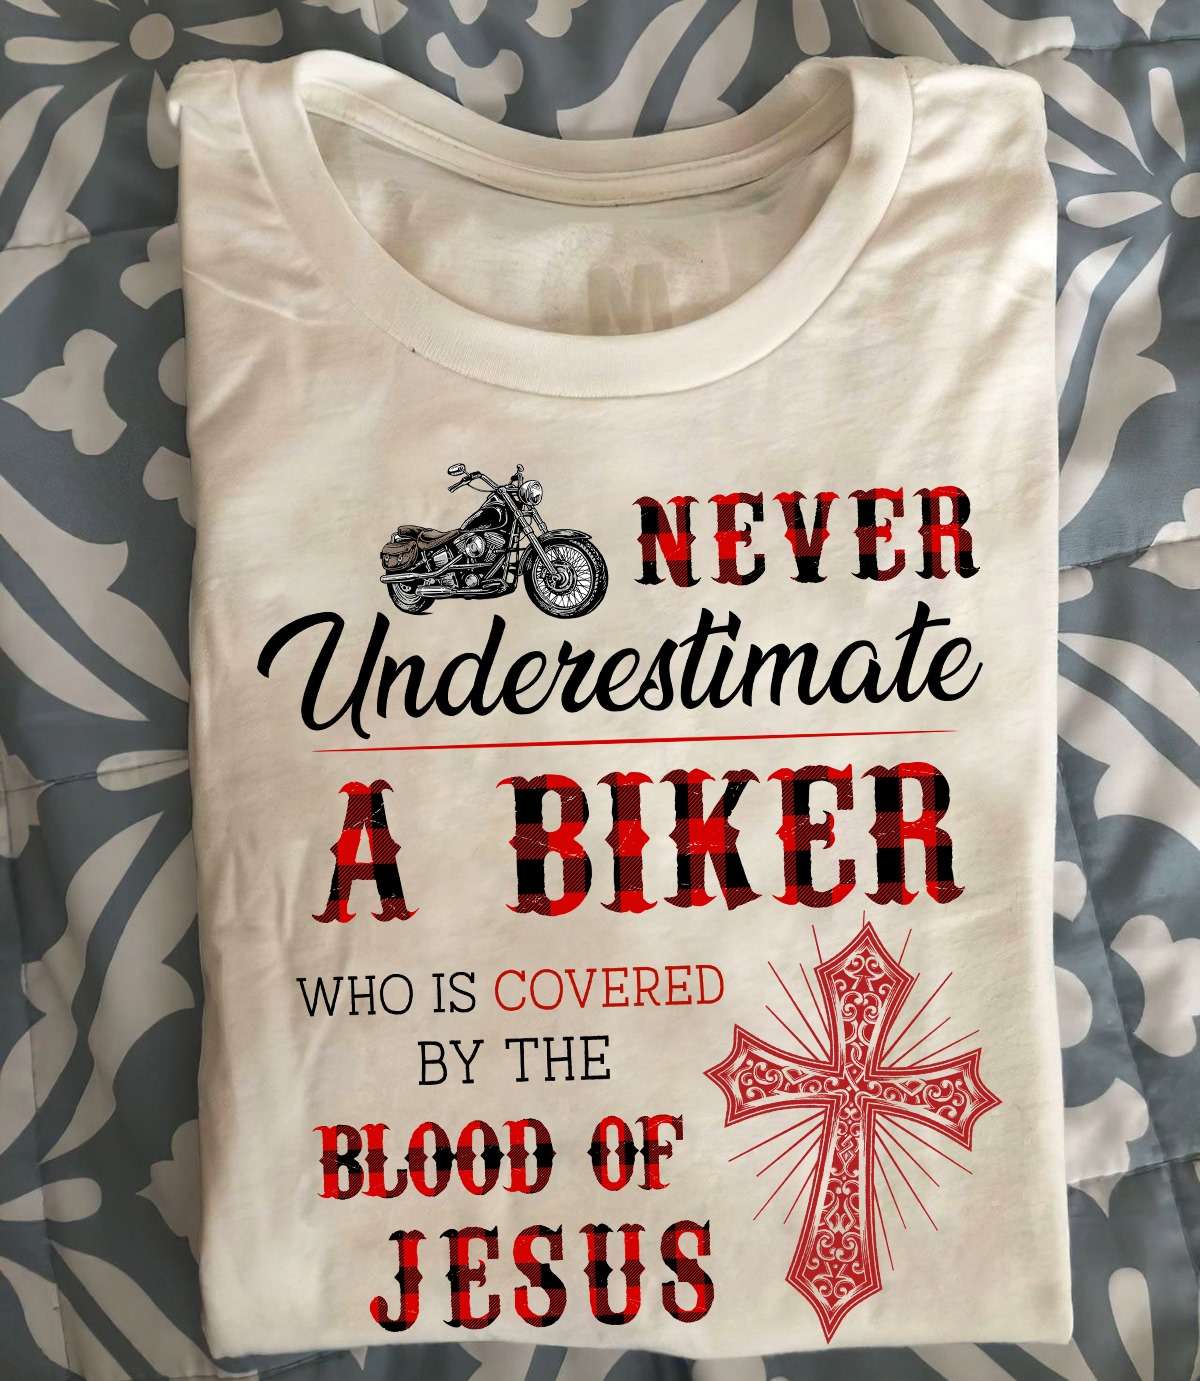 Motorcycles Biker, God's Cross - Never underestimate a biker who is covered by the blood of jesus